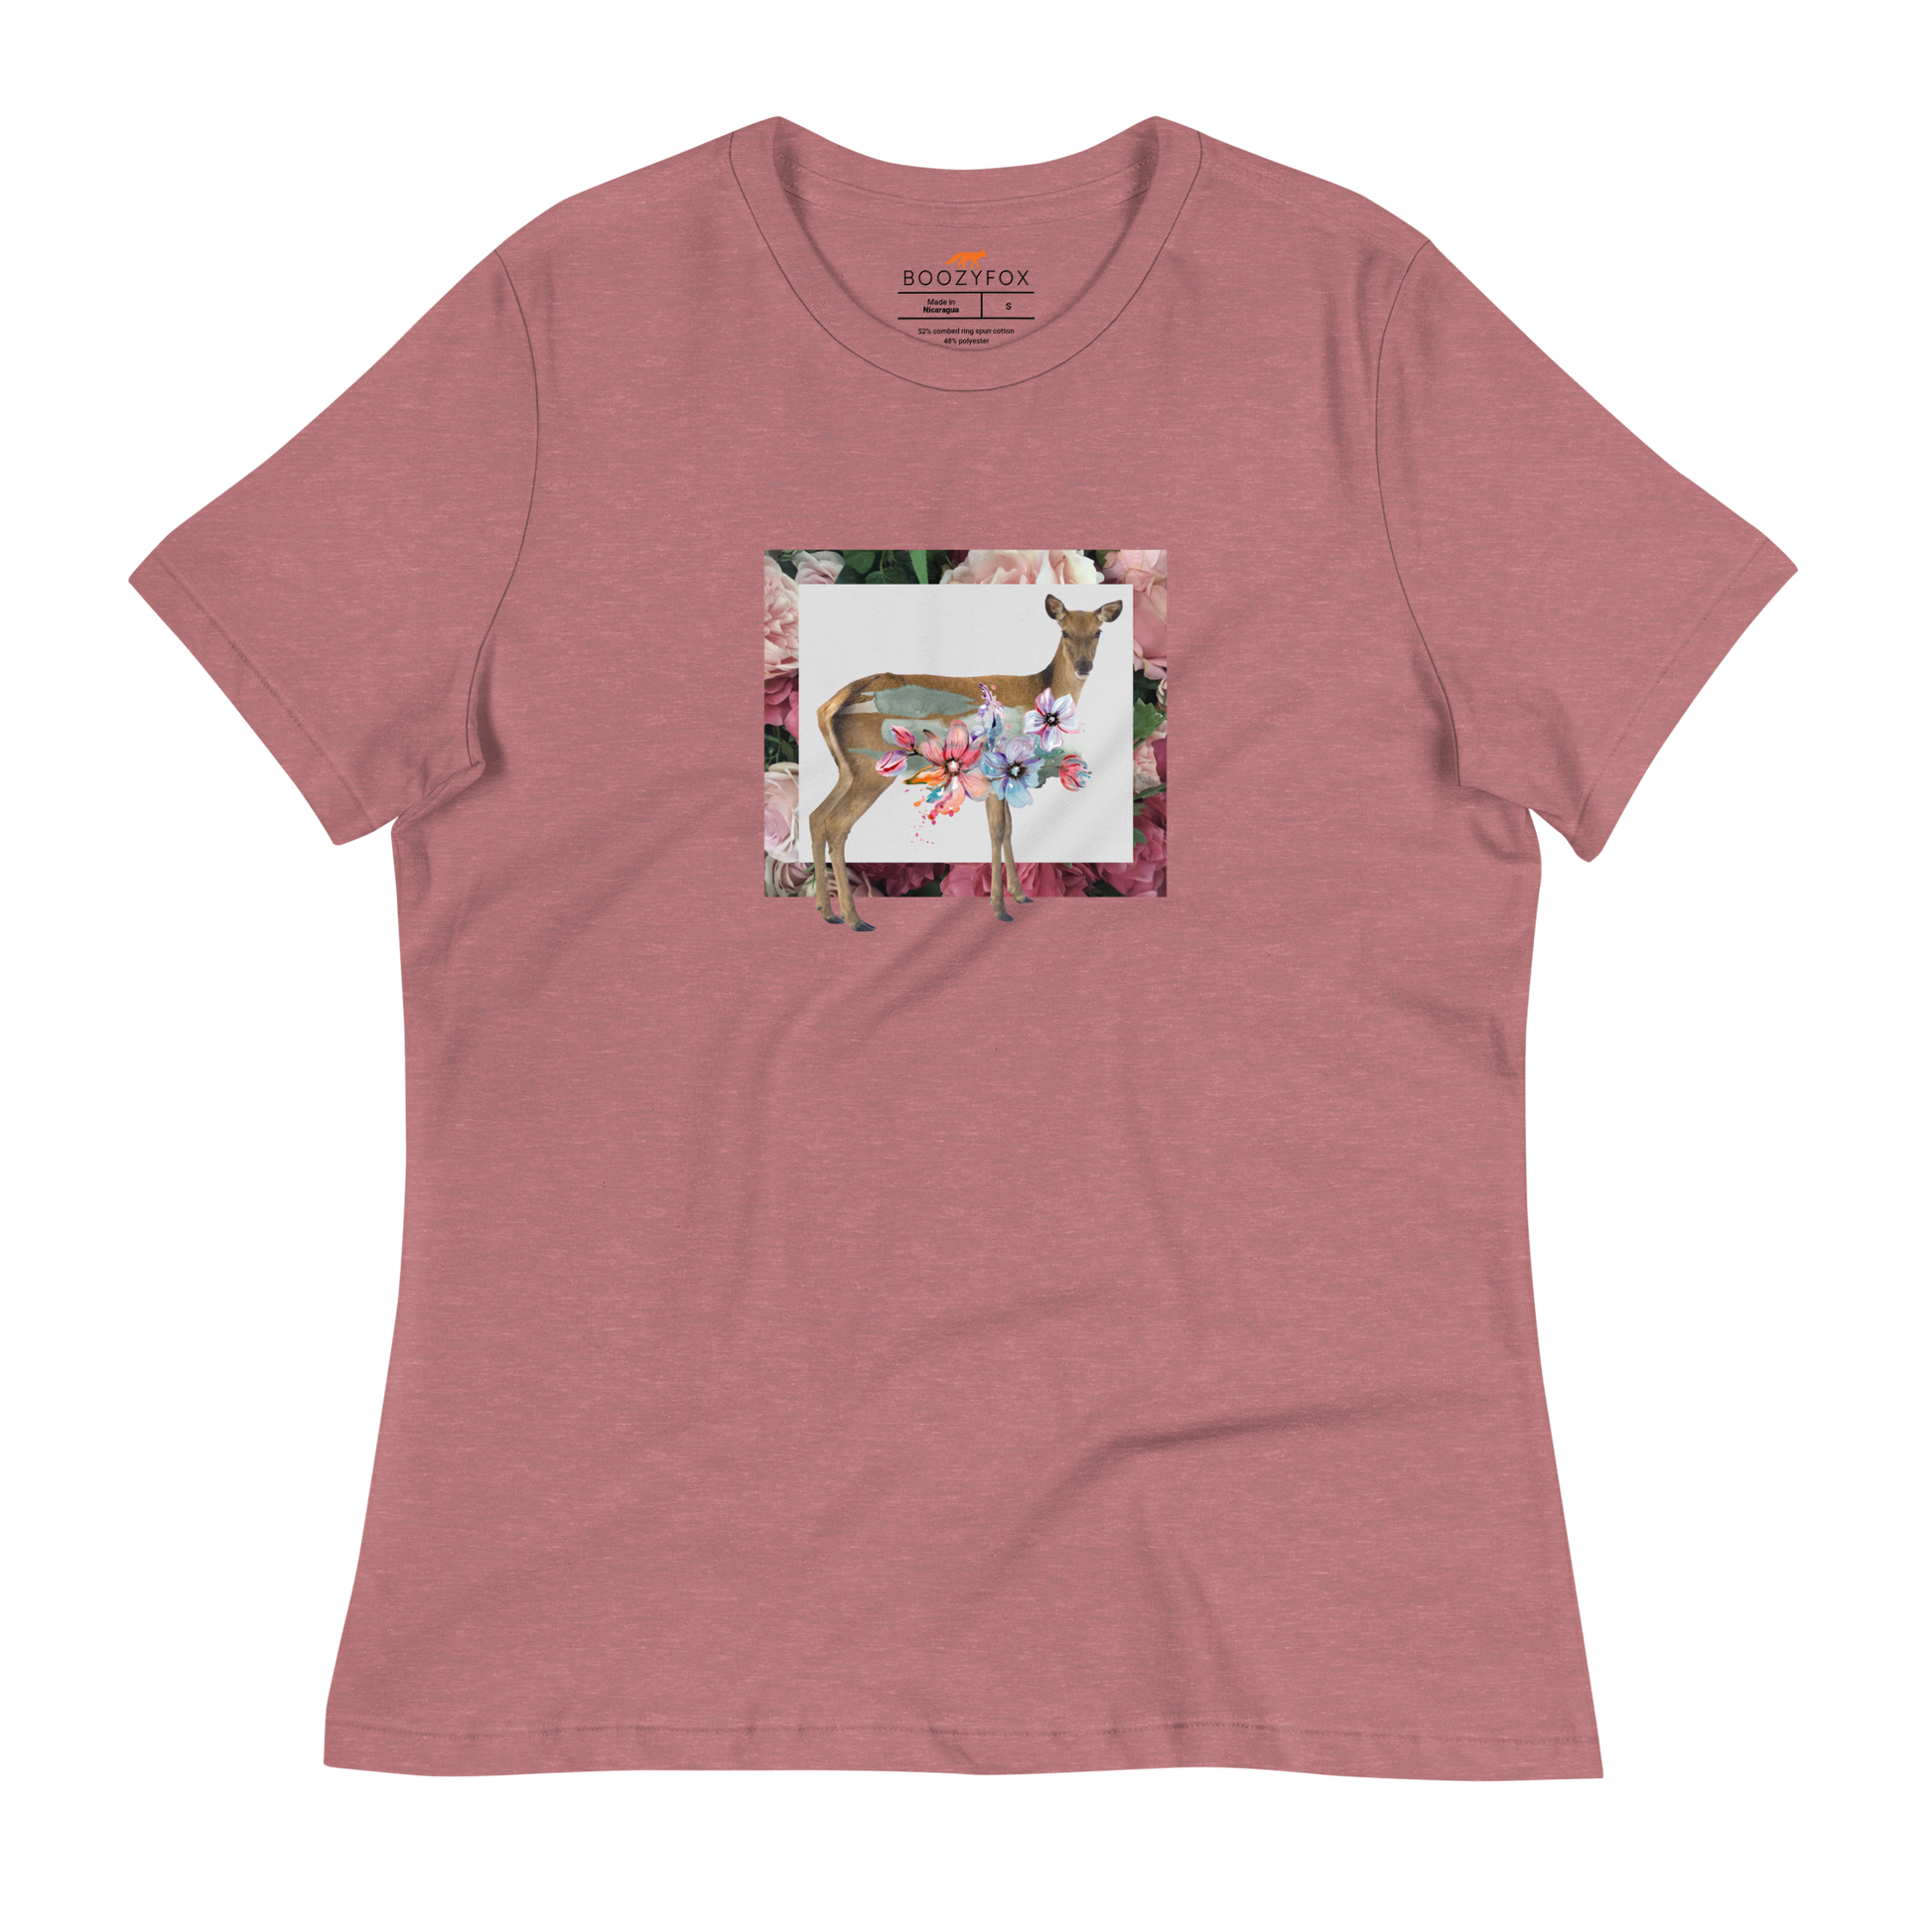 Women's relaxed heather mauve Deer t-shirt featuring a captivating Floral Deer graphic on the chest - Women's Graphic Deer Tees - Boozy Fox